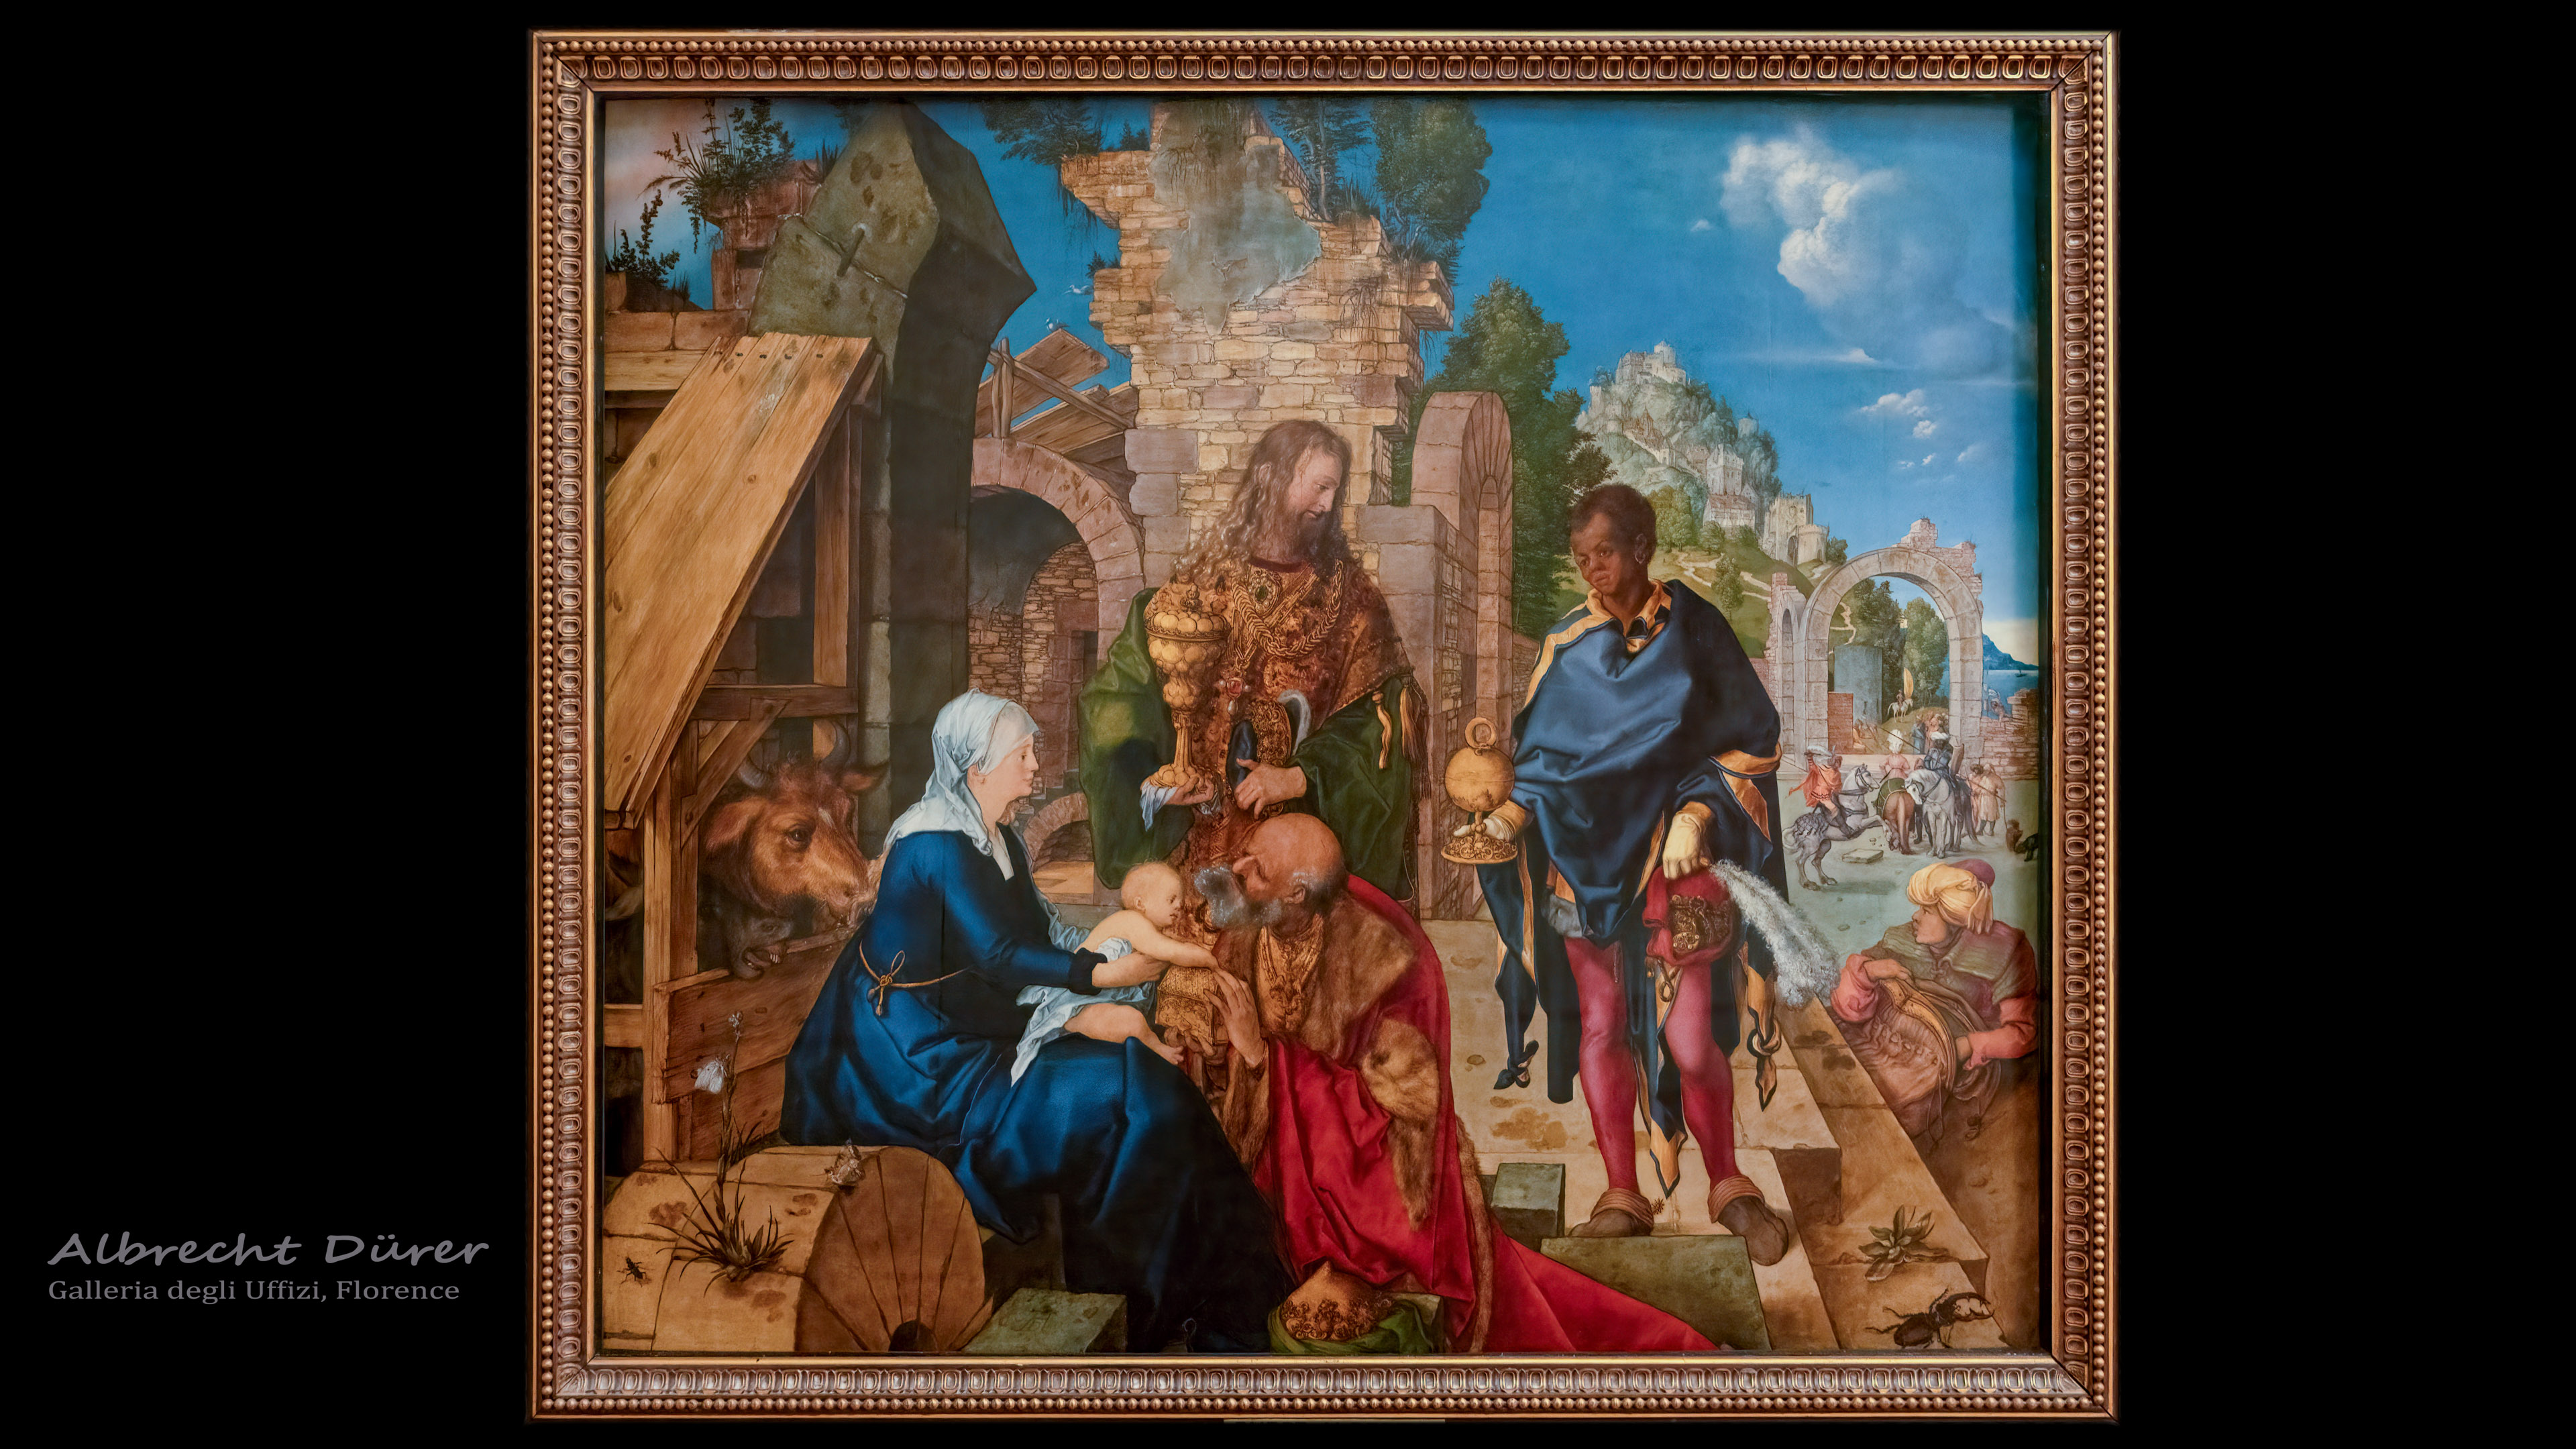 Experience the realism and richness of the German Renaissance genius with 'Adoration of the Magi' by Durer wallpaper, featuring his exquisite and intricate painting of the biblical scene.